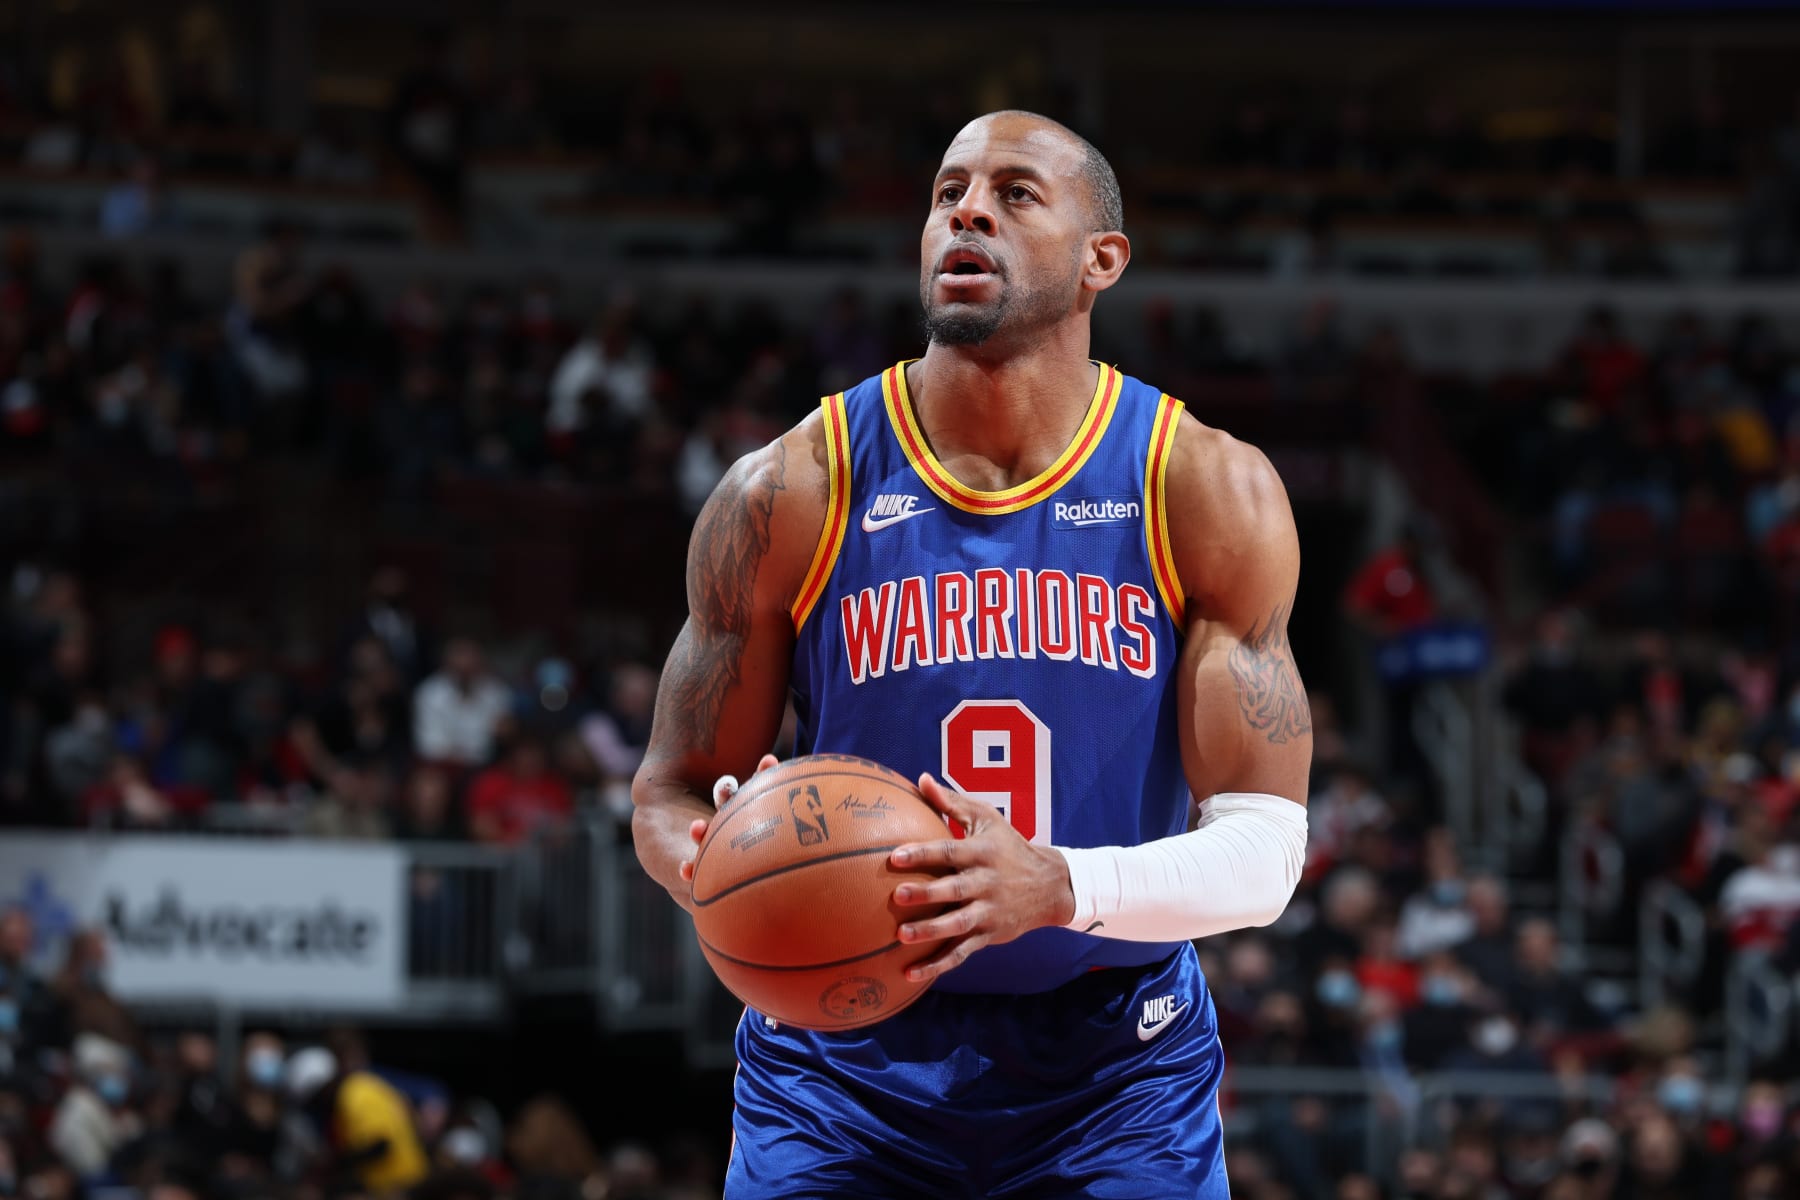 Report: Major update offered on Andre Iguodala potentially joining